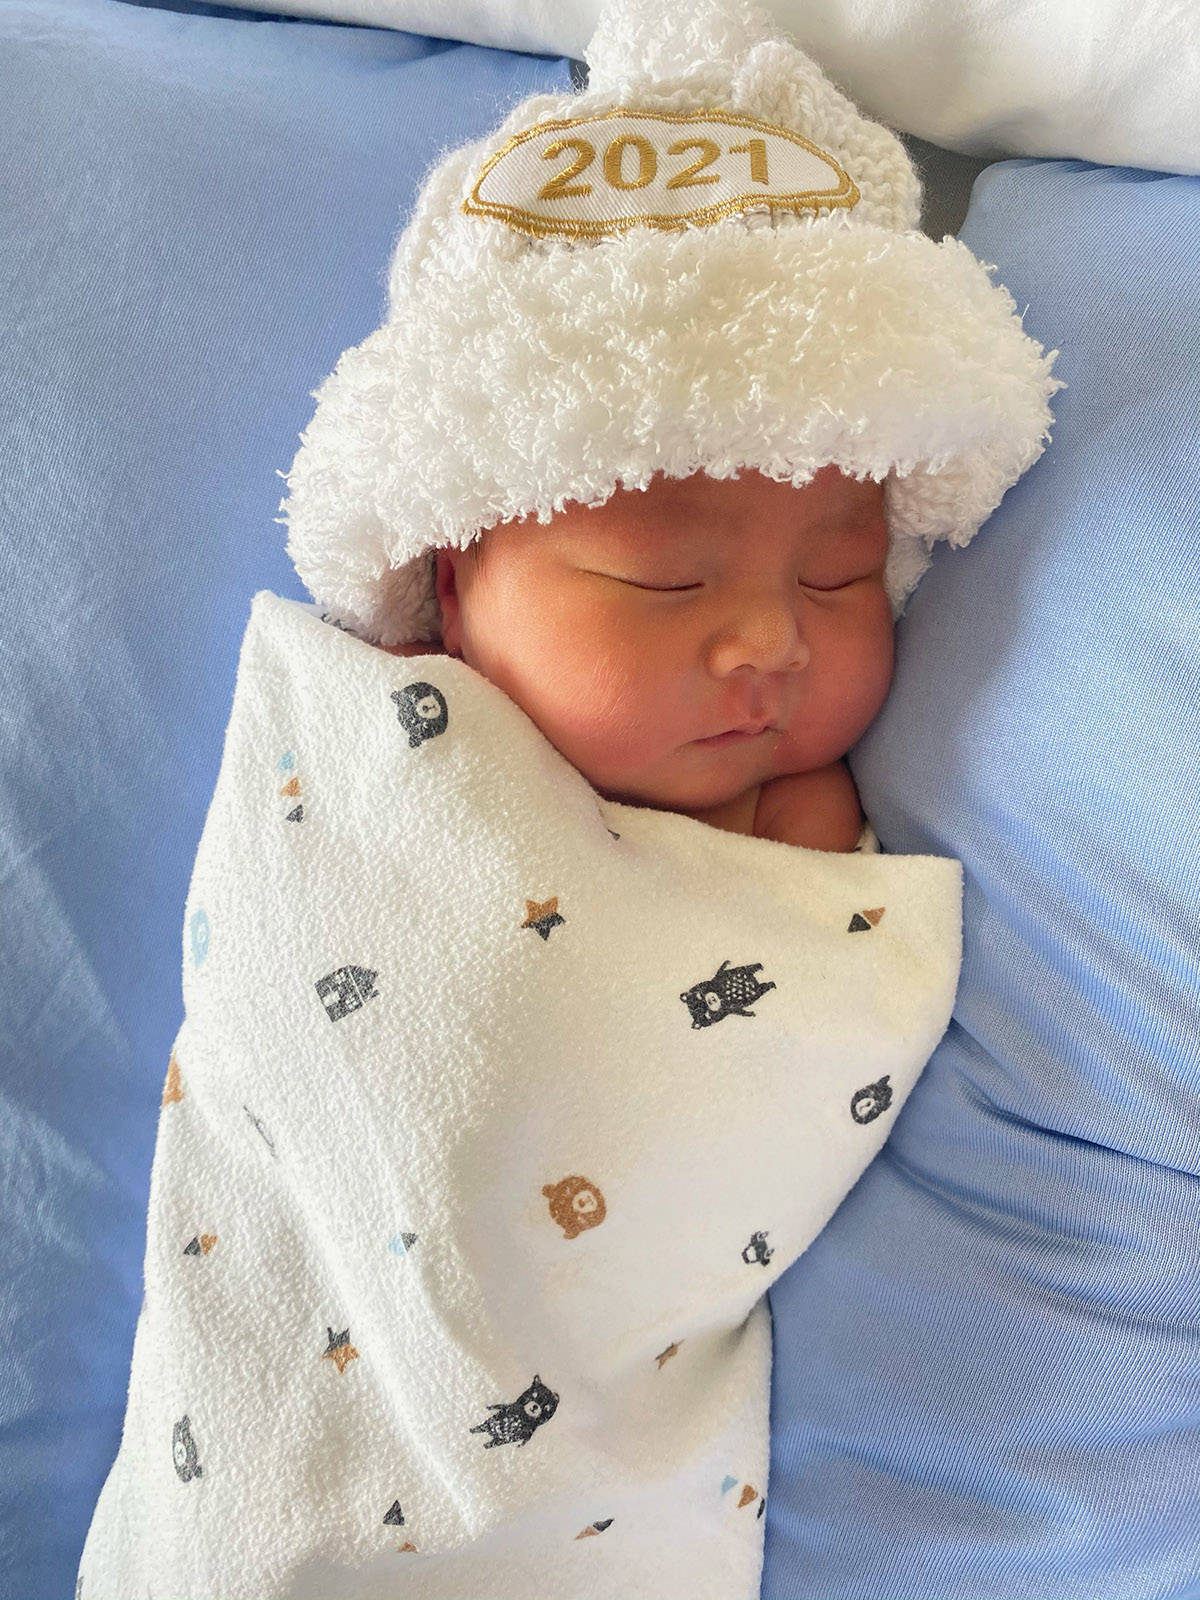 Danzel and Maclean Ondevilla welcomed their first-born child, Dylan Mikael Ondevilla, into the world on Jan. 1, 2021. (Submitted)